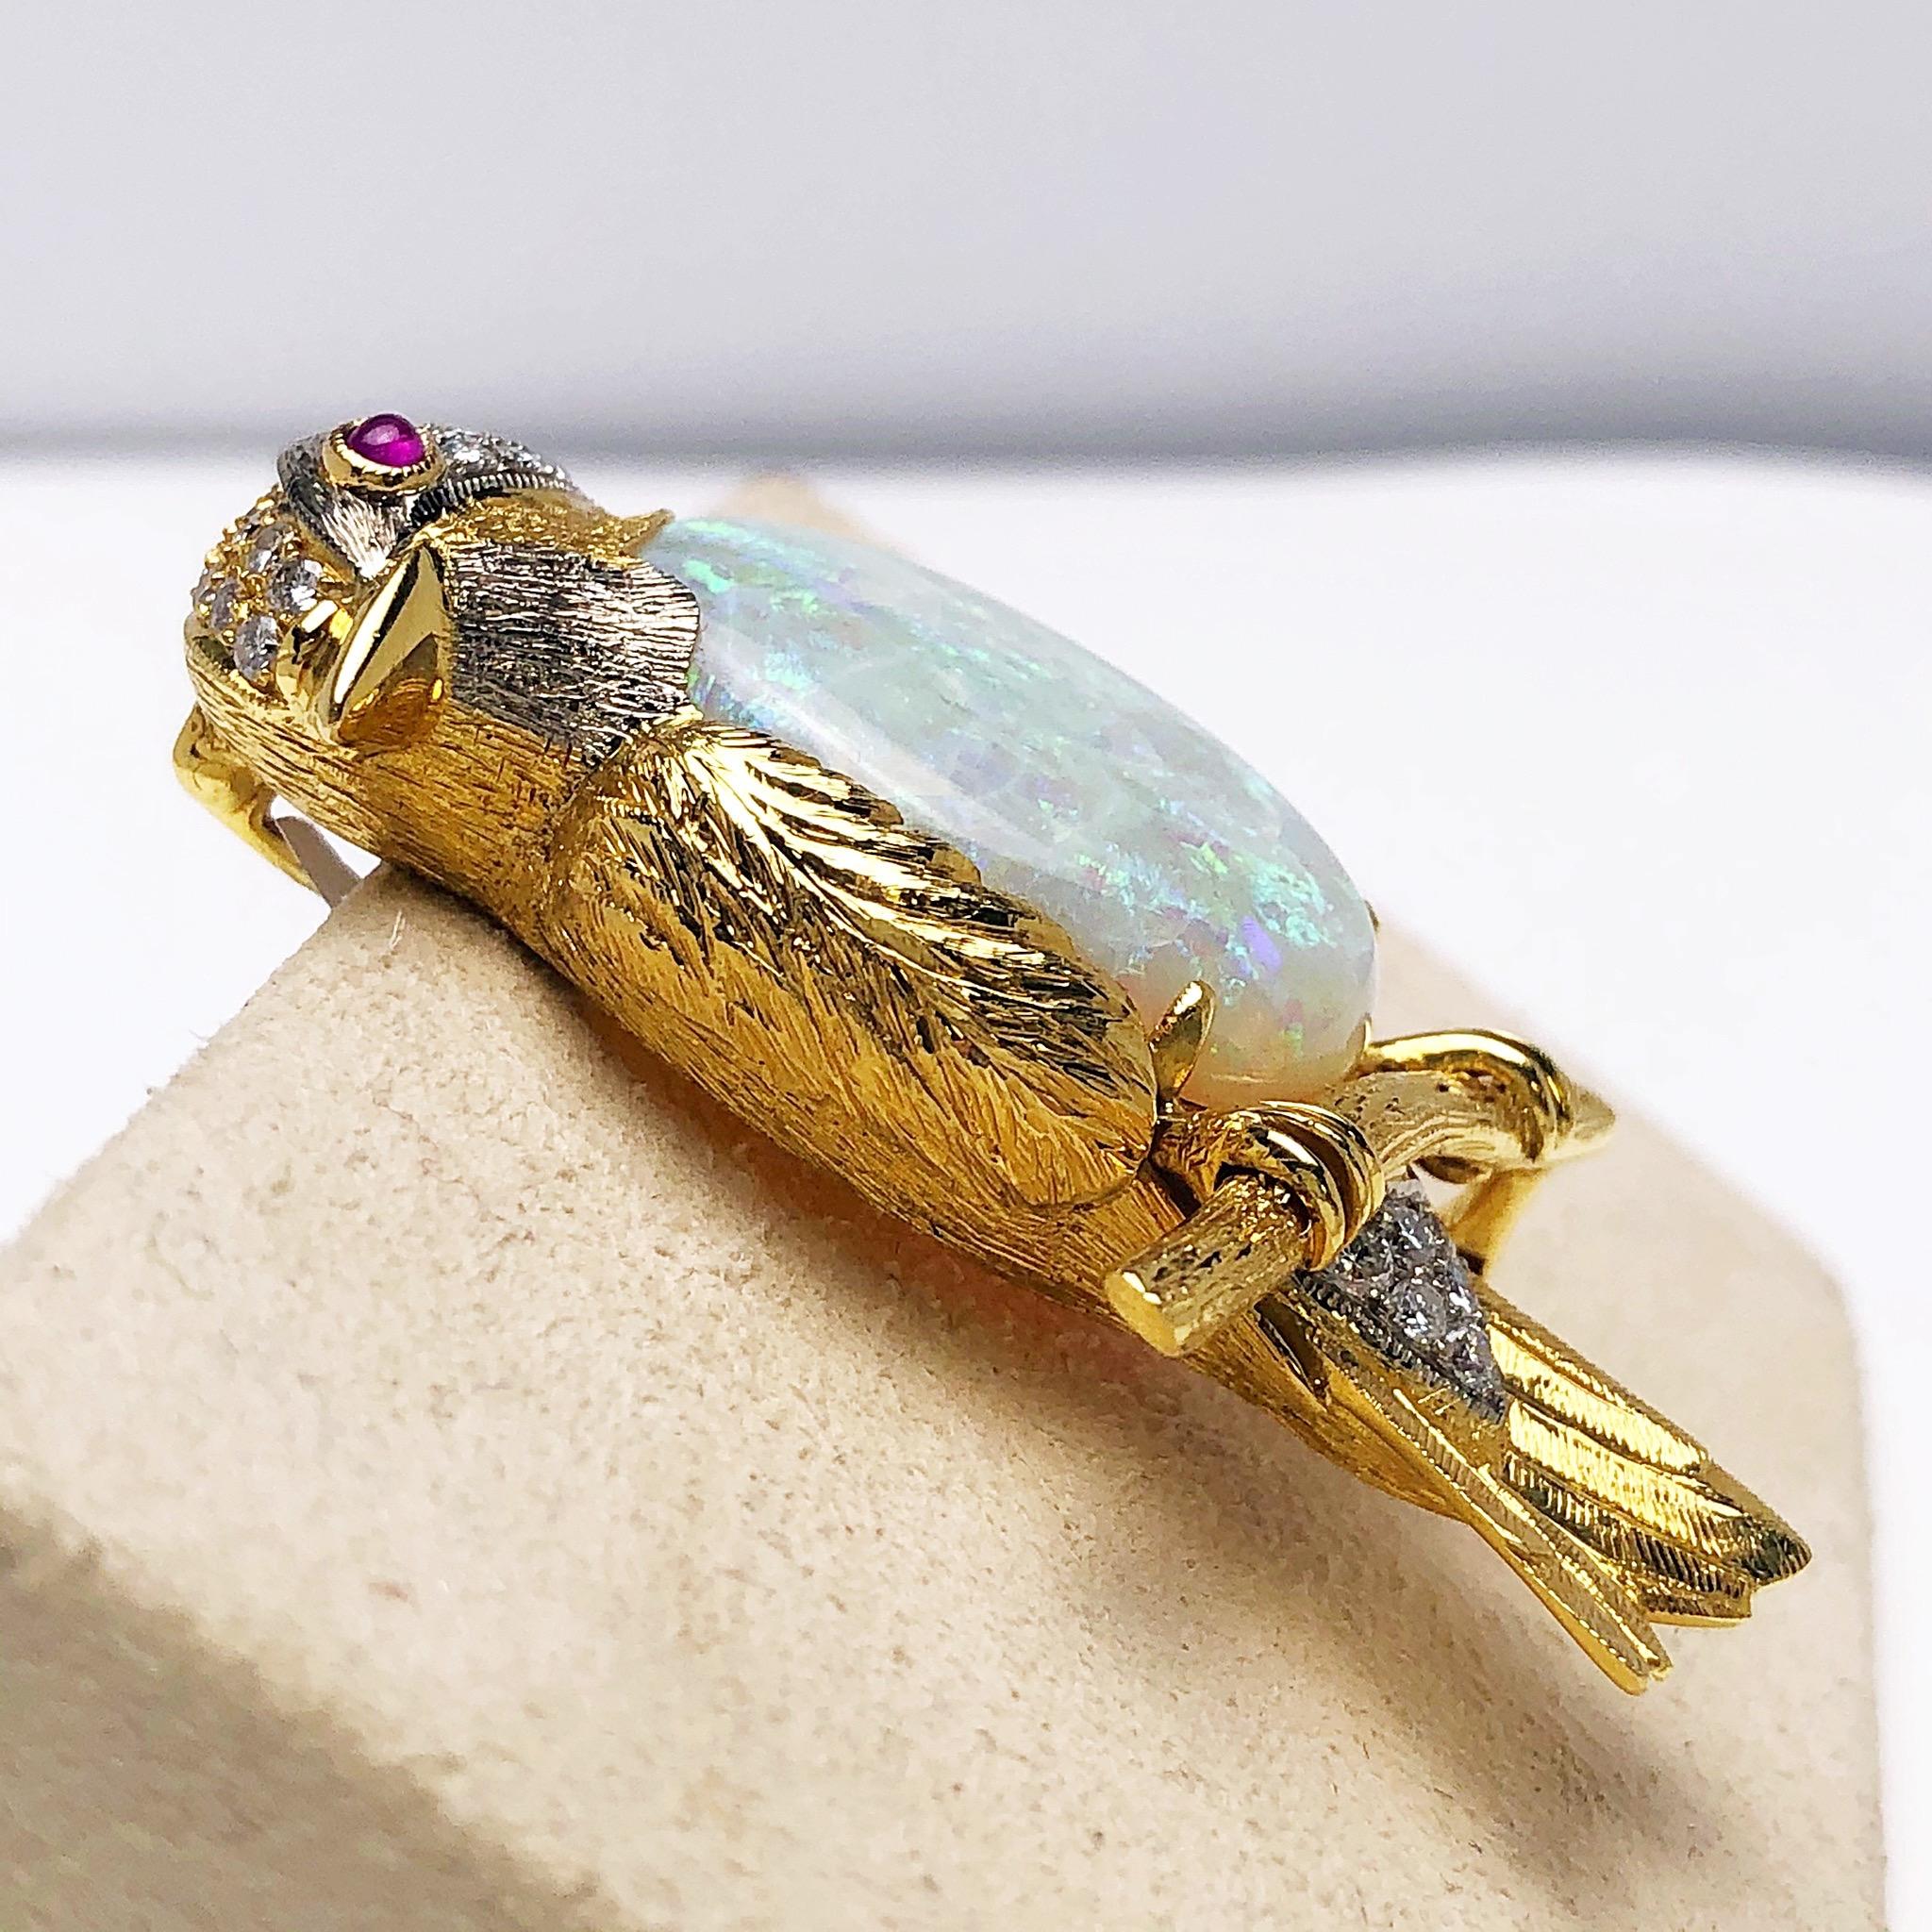 This lovely vintage bird brooch is crafted in 18 karat yellow gold with small touches of white gold. The belly of the bird is set with a magnificent white opal weighing 11.26 carats. This precious opal has flashes of green.  The birds head and part